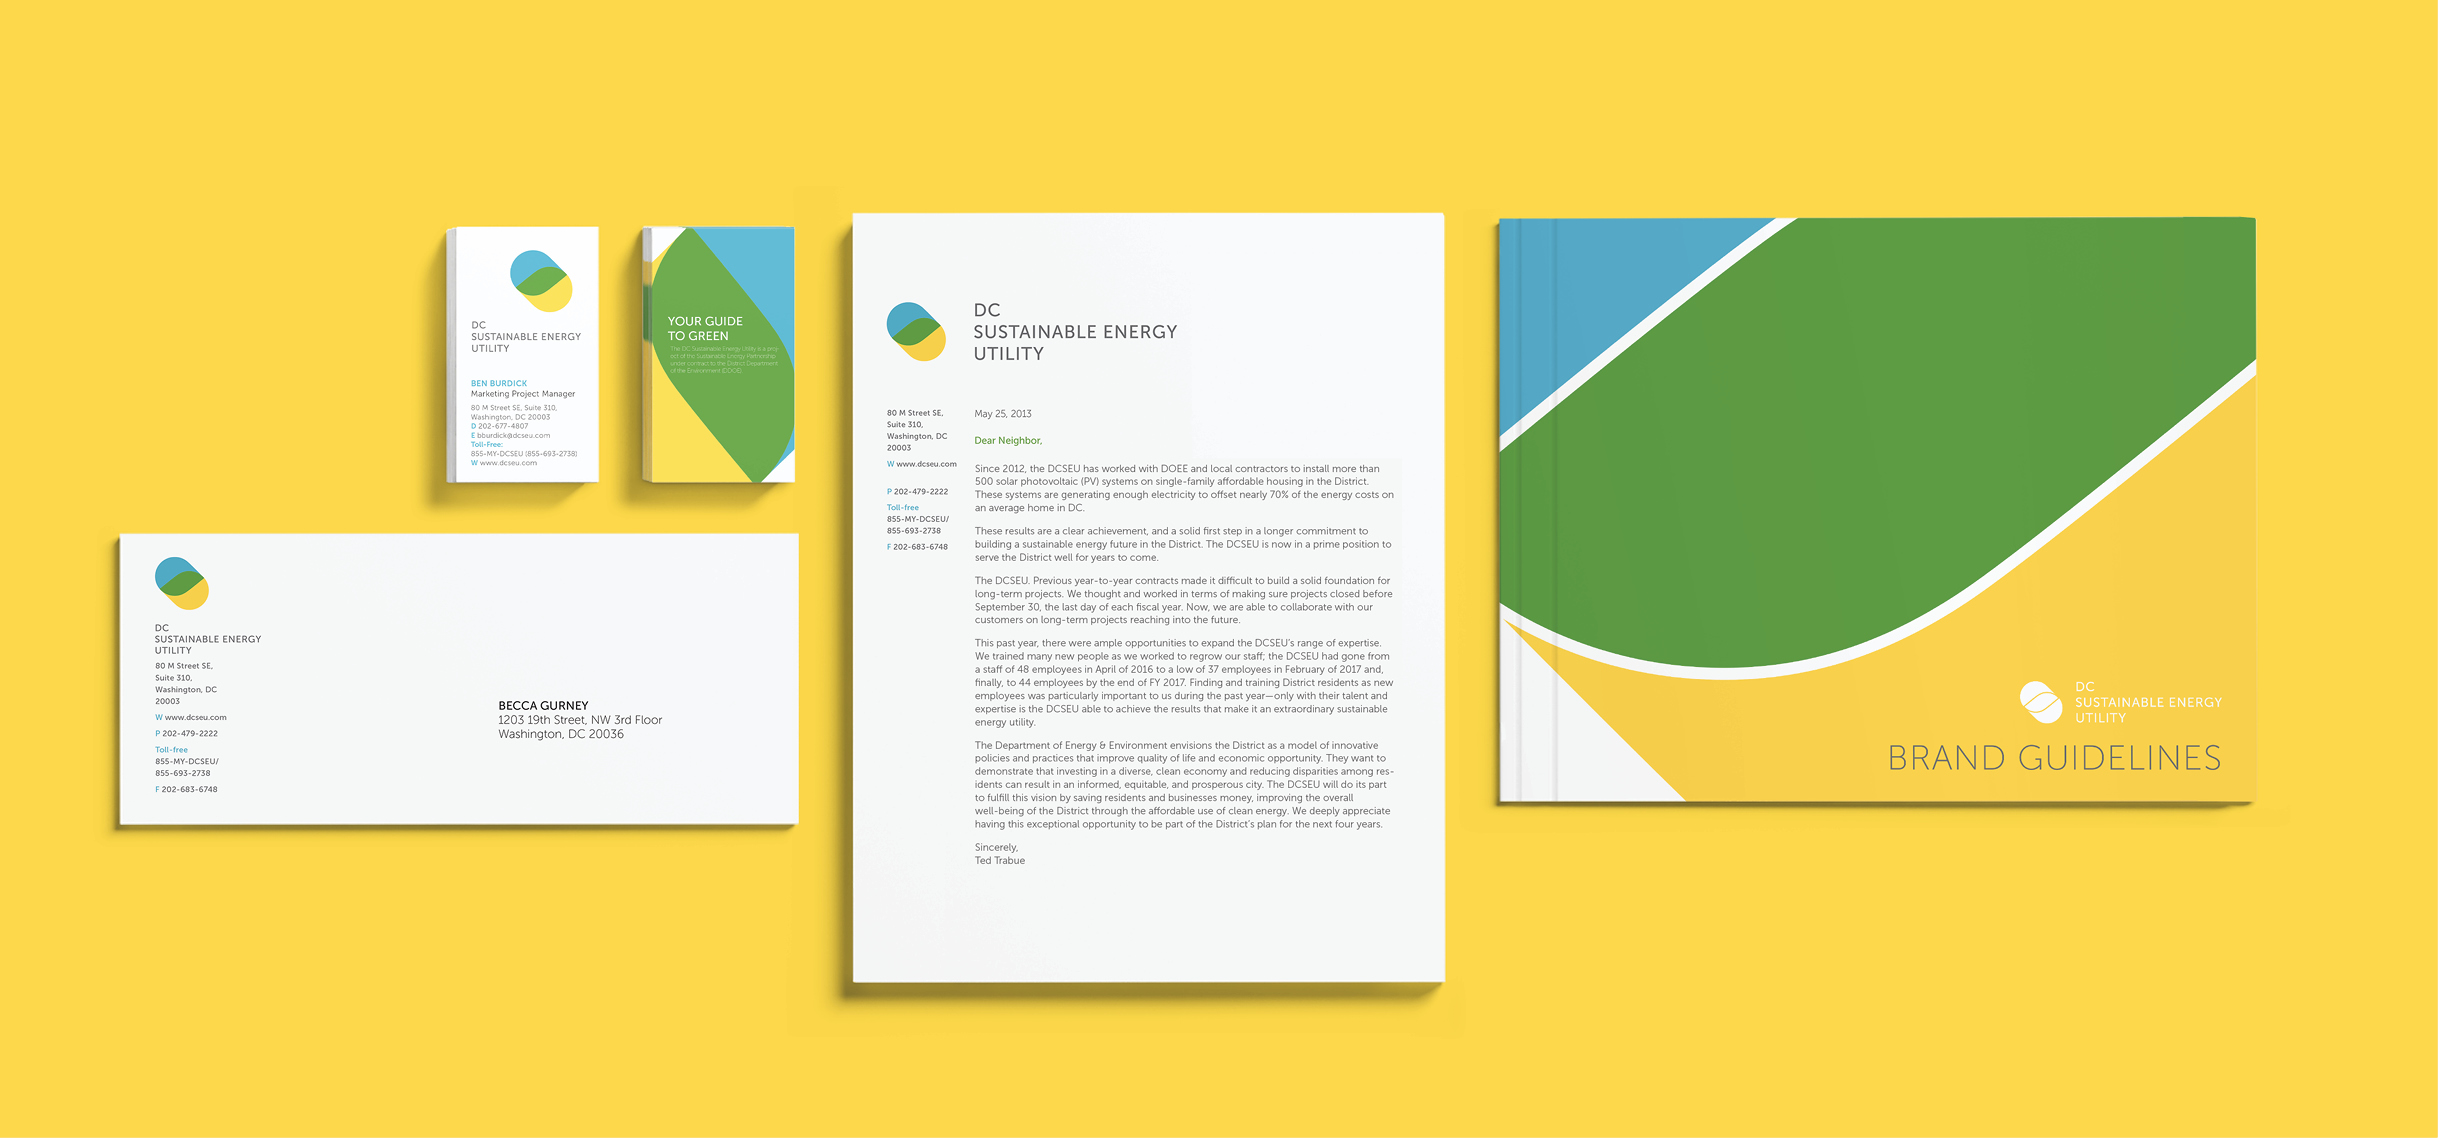 The stationary set including letterhead, business card, envelope and the Brand Guide book. All items are neatly arranged and aligned on a yellow background.